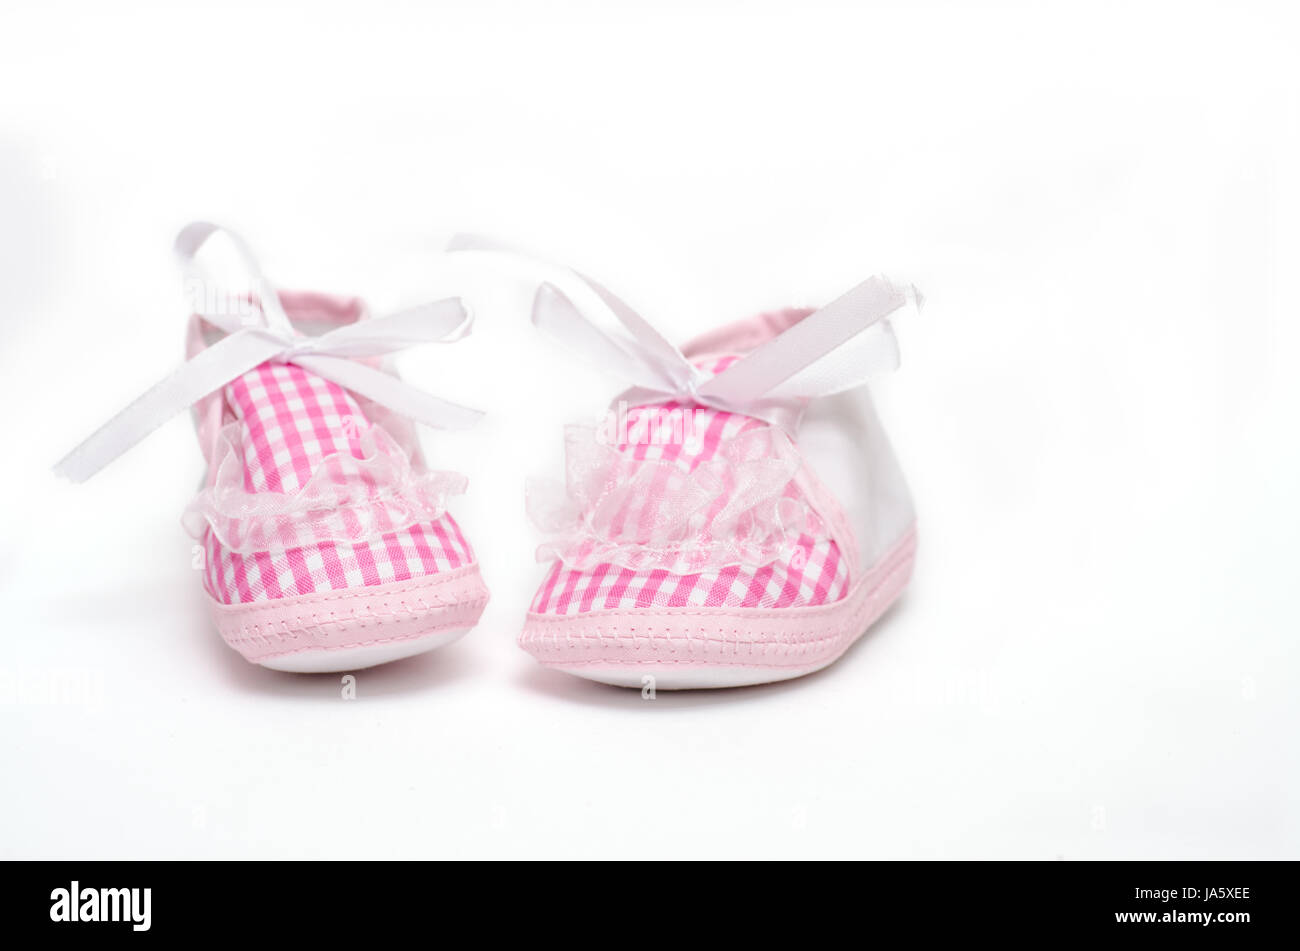 shoes, loop, quillings, children's footwear, backdrop, background, girl, girls, Stock Photo